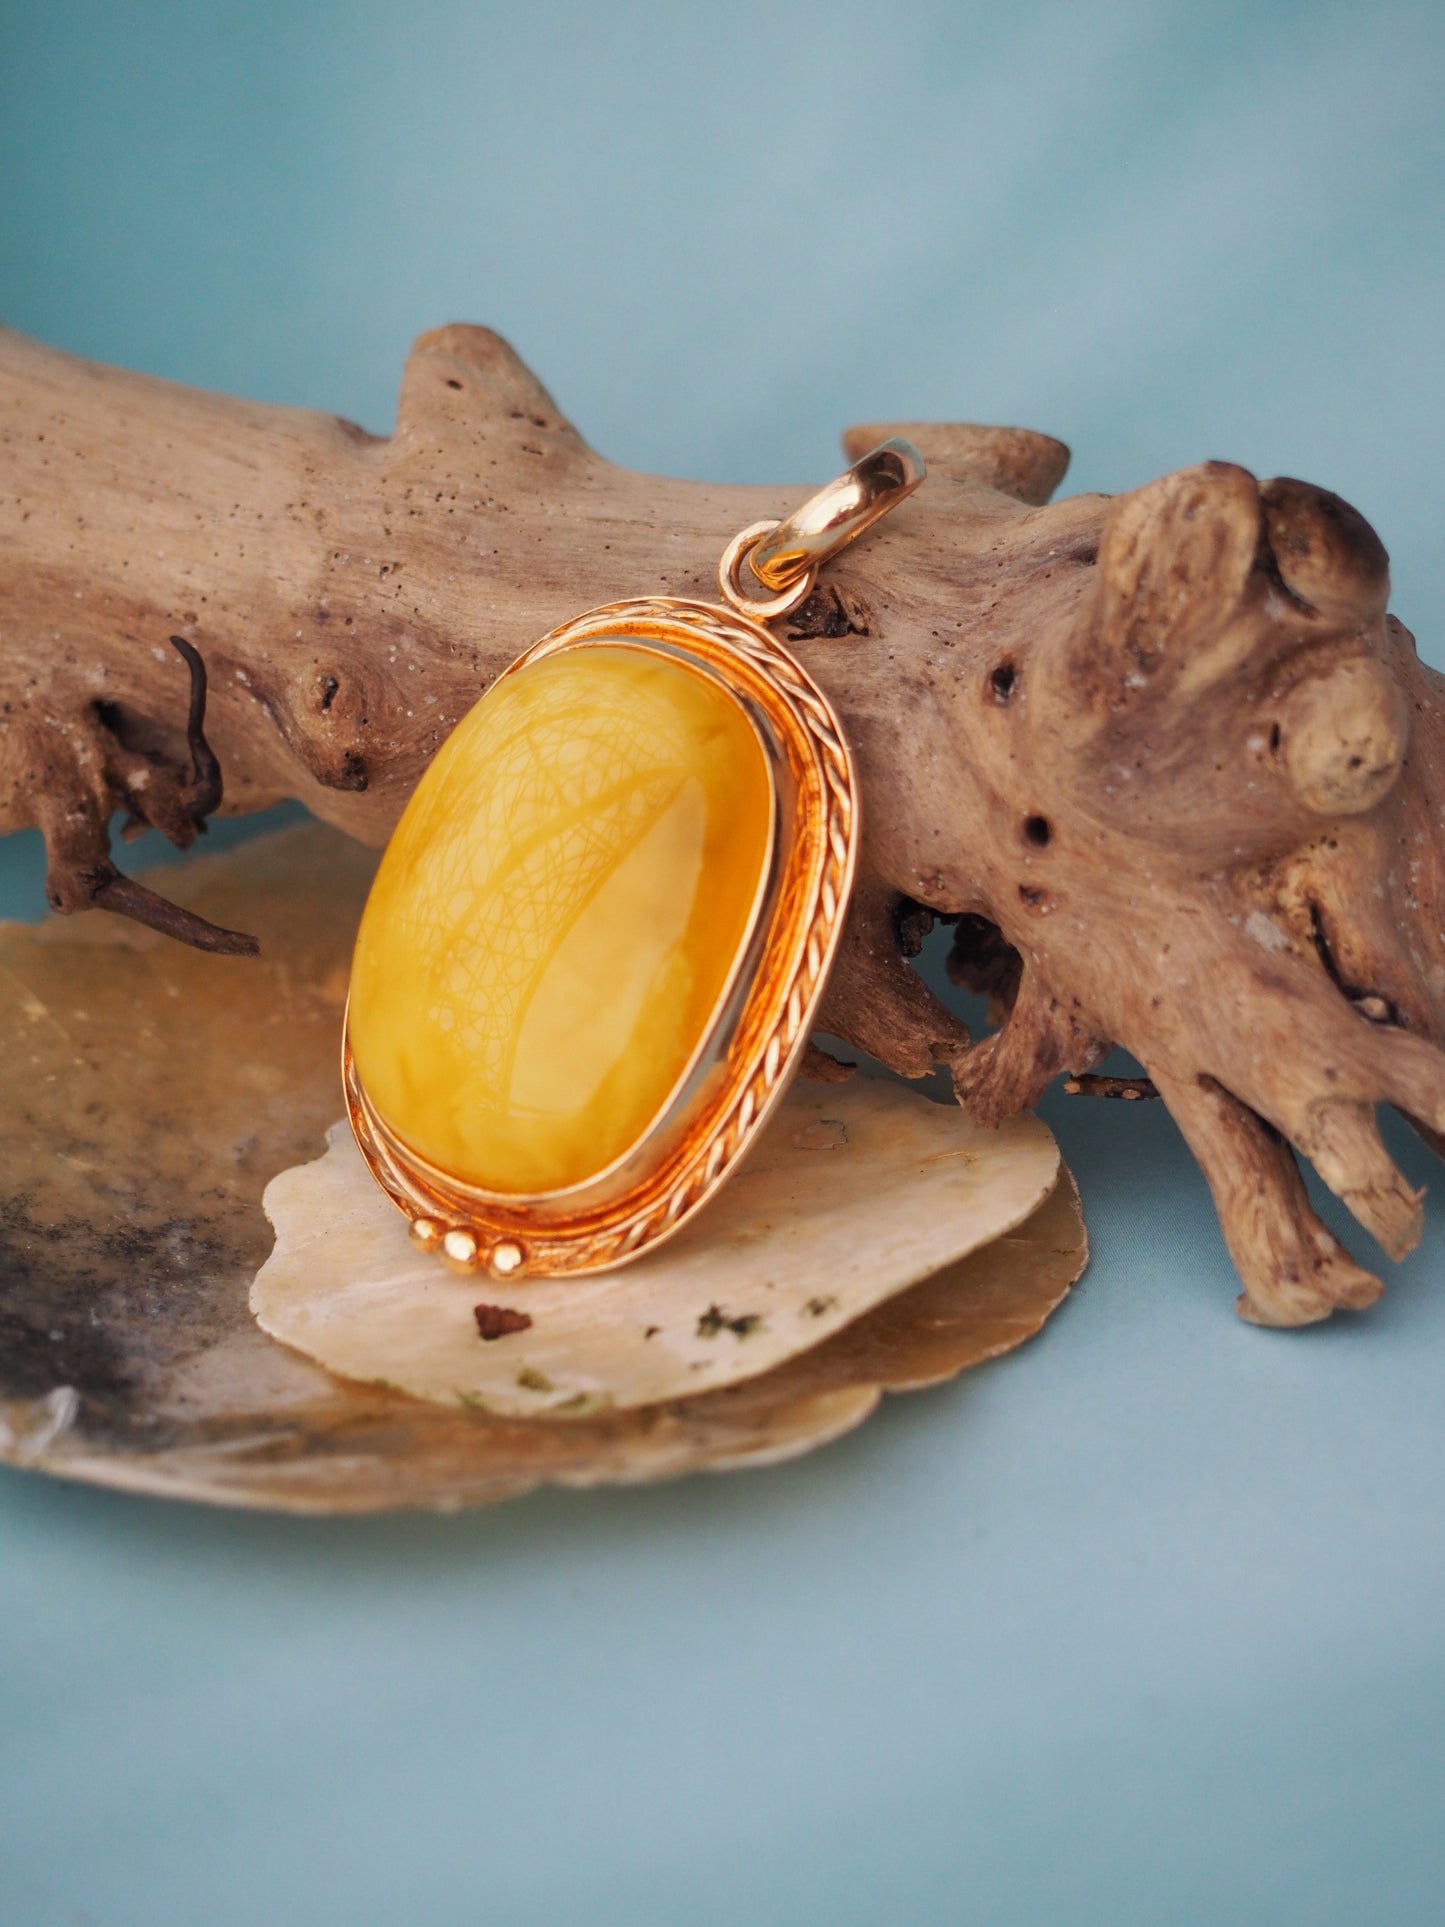 Butterscotch Amber Pendant in Rose Gold Pleated Silver Frame